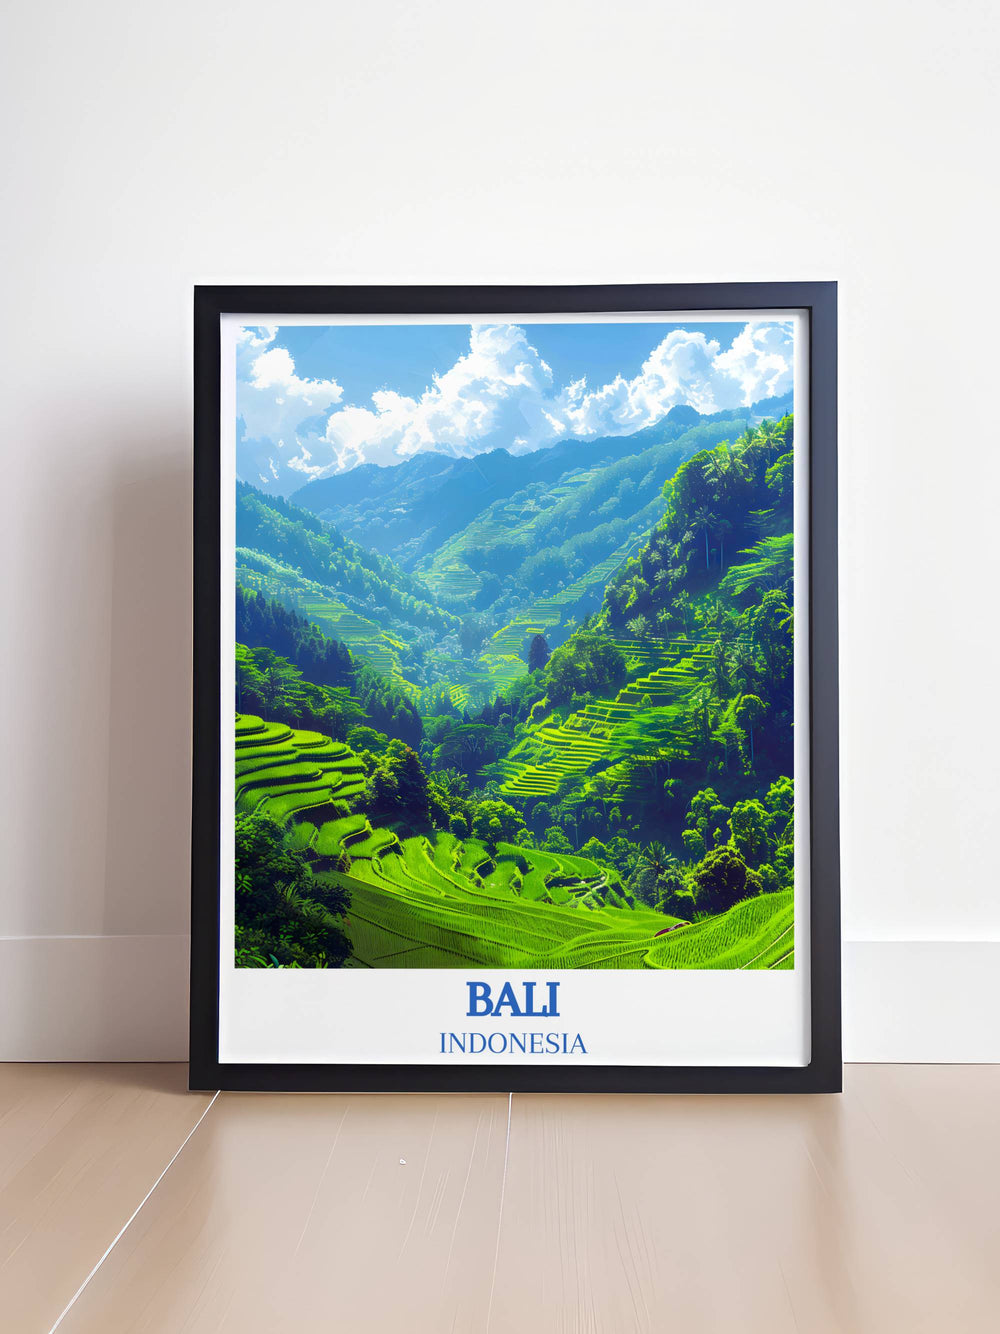 Bali gift featuring Tegalalang Rice Terraces, suitable for all occasions like birthdays and anniversaries, capturing the charm of Indonesian landscapes.